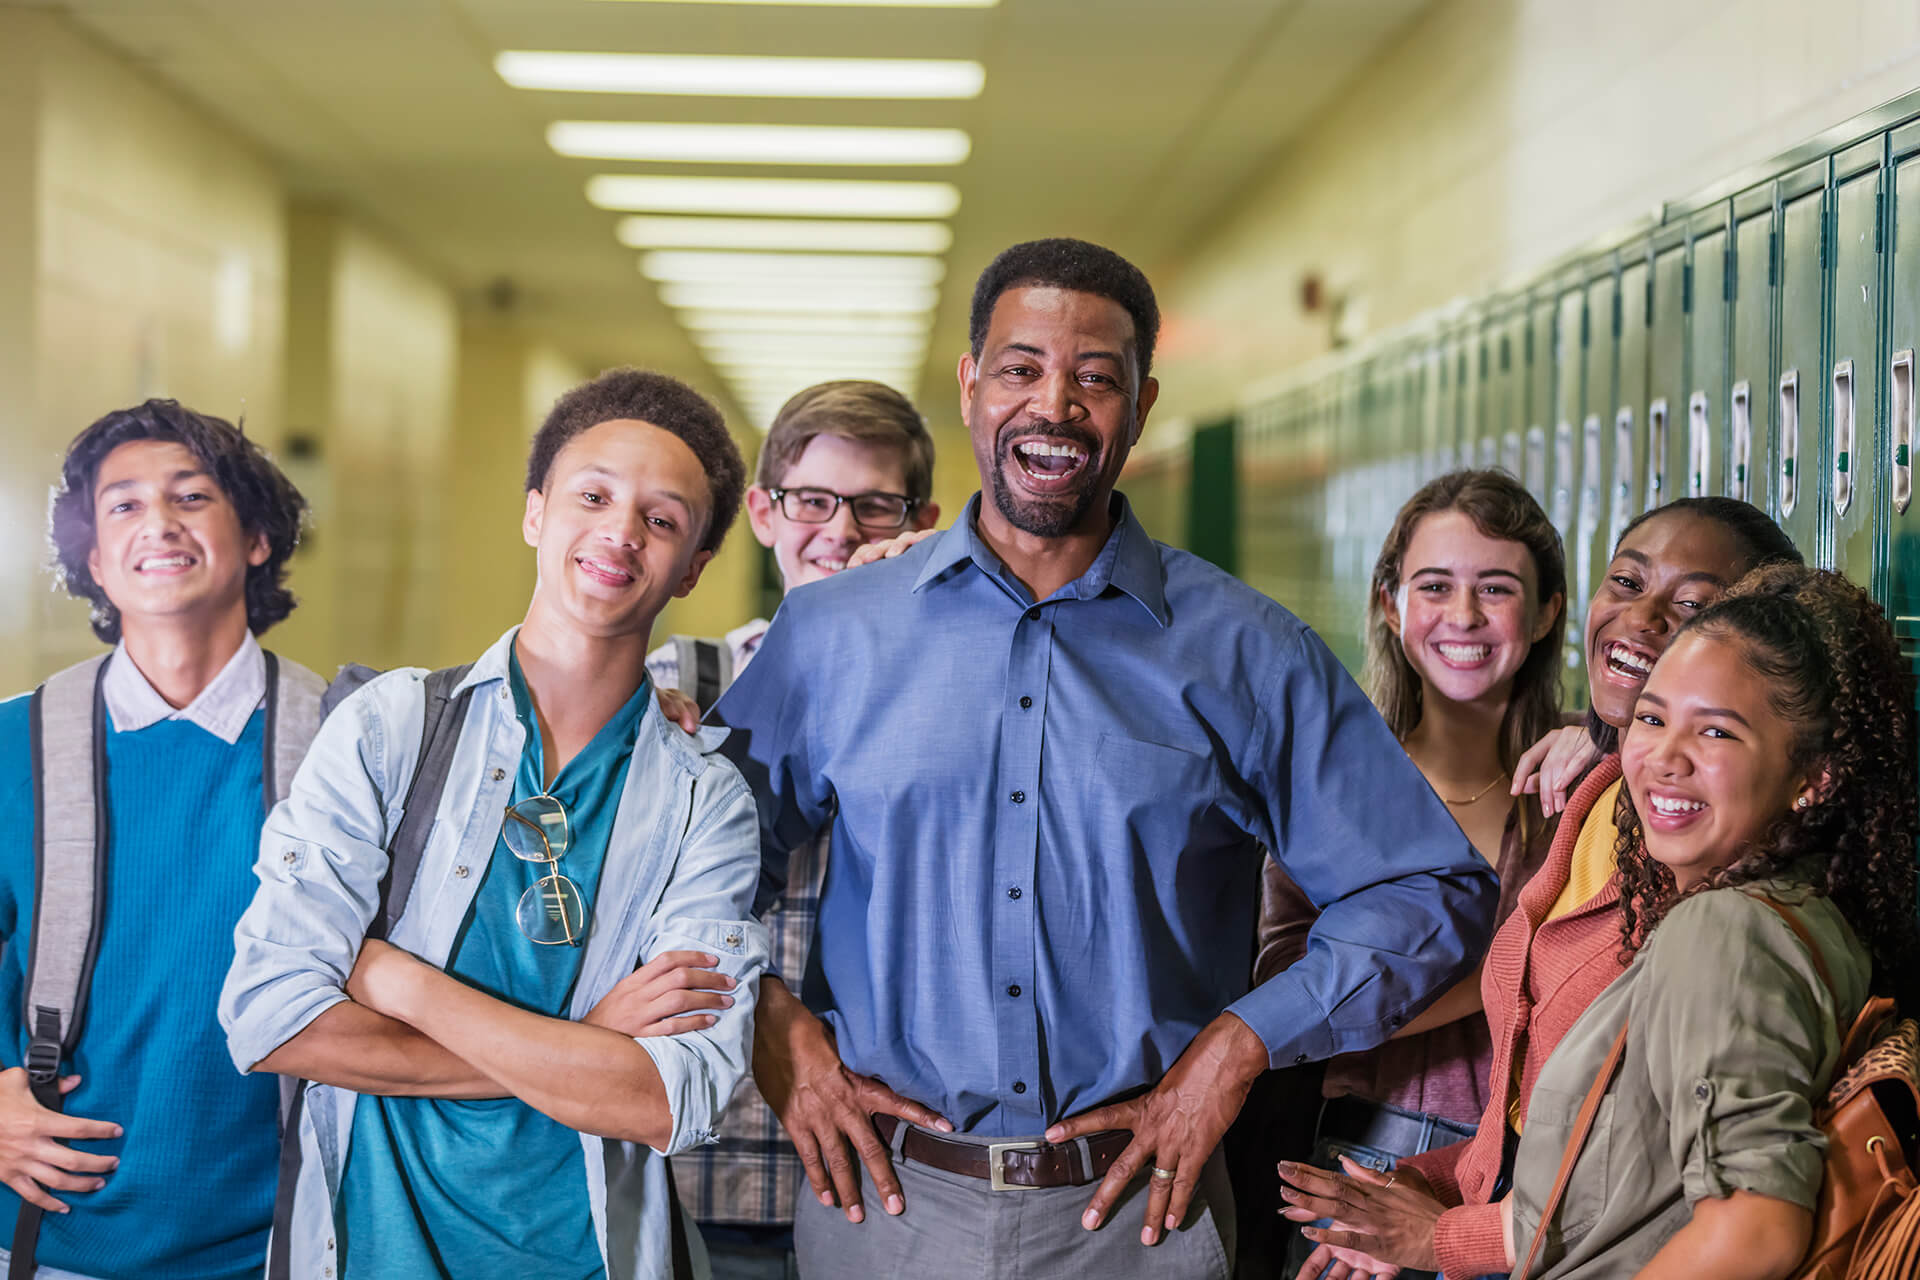 High school teacher and students standing in hallway smiling